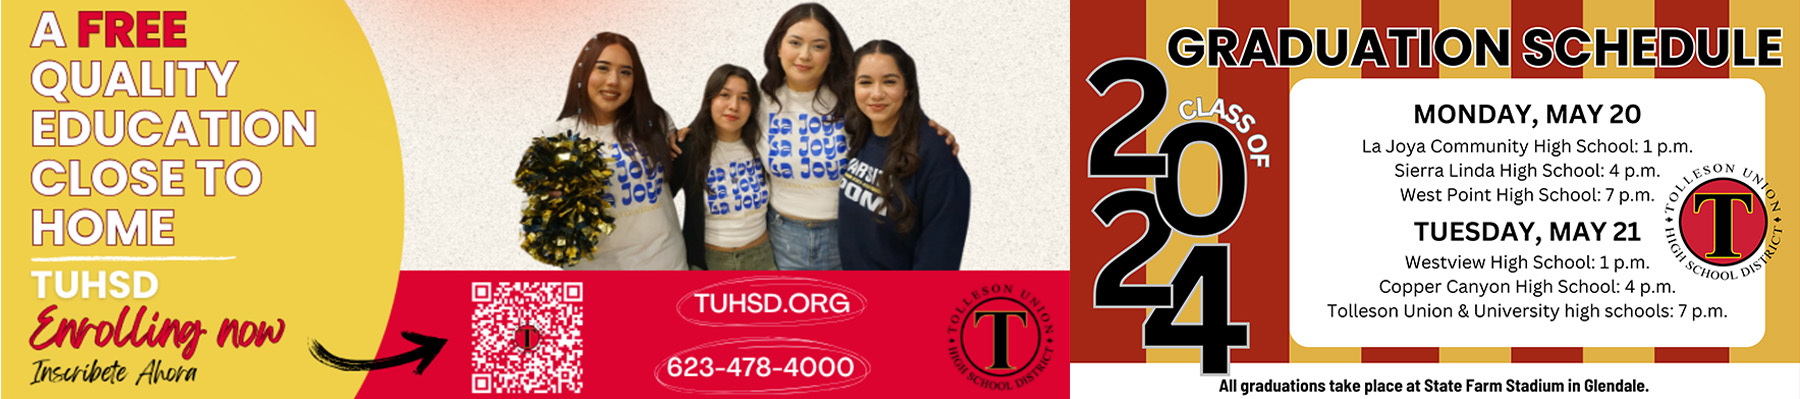 SUPPORT OUR SCHOOLS WITH A TAX CREDIT DONATION! Single person donation of $200 or married joint filing donation of $400 Remember TUHSD when you're filing your taxes! | Graduation Schedule